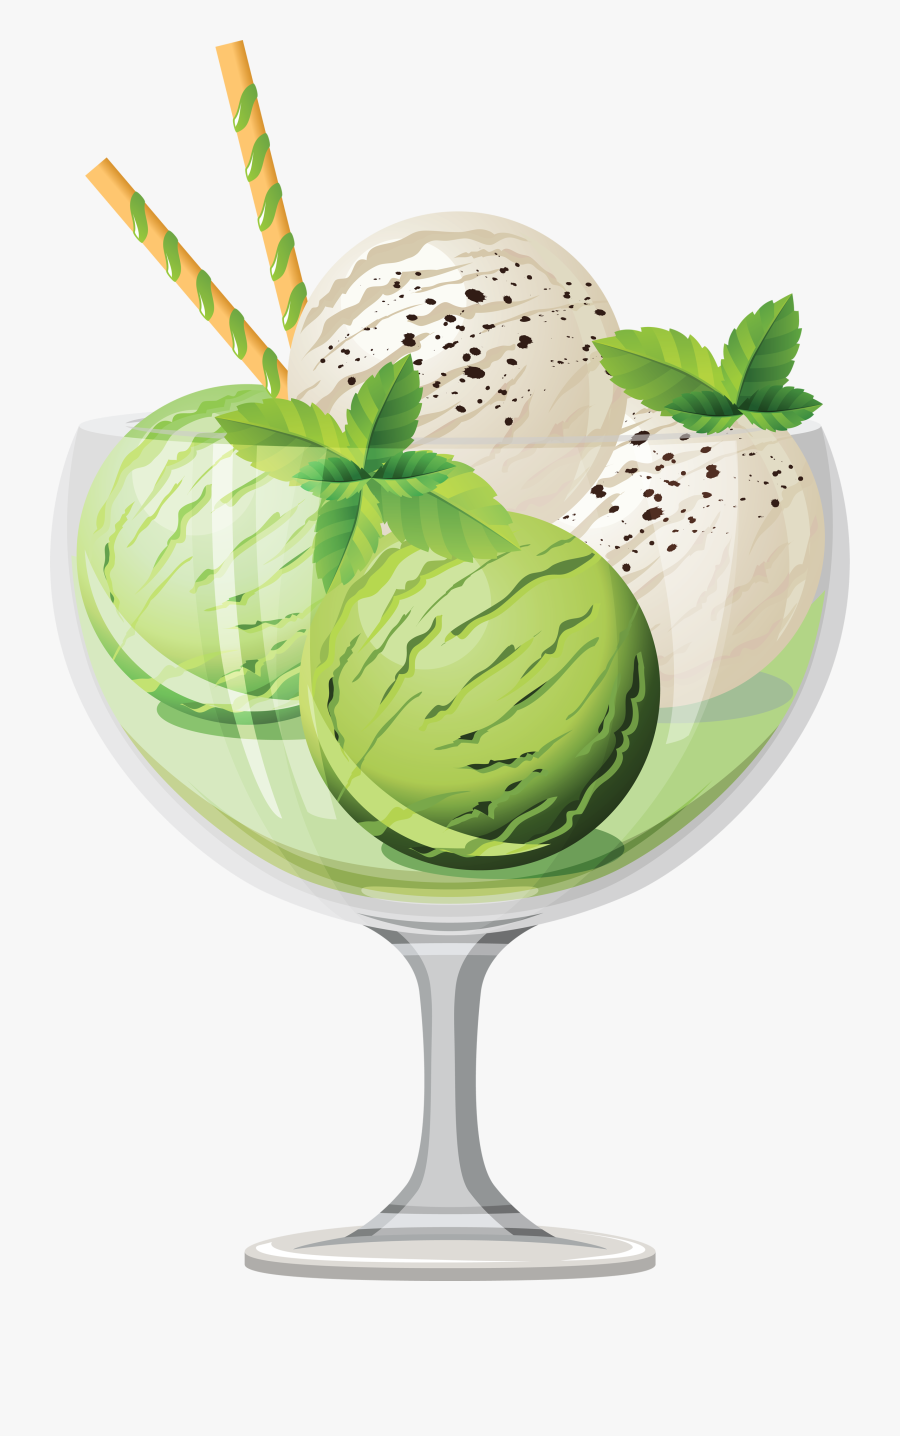 Fruit Ice Cream Png Image - Ice Cream Cup Vector, Transparent Clipart